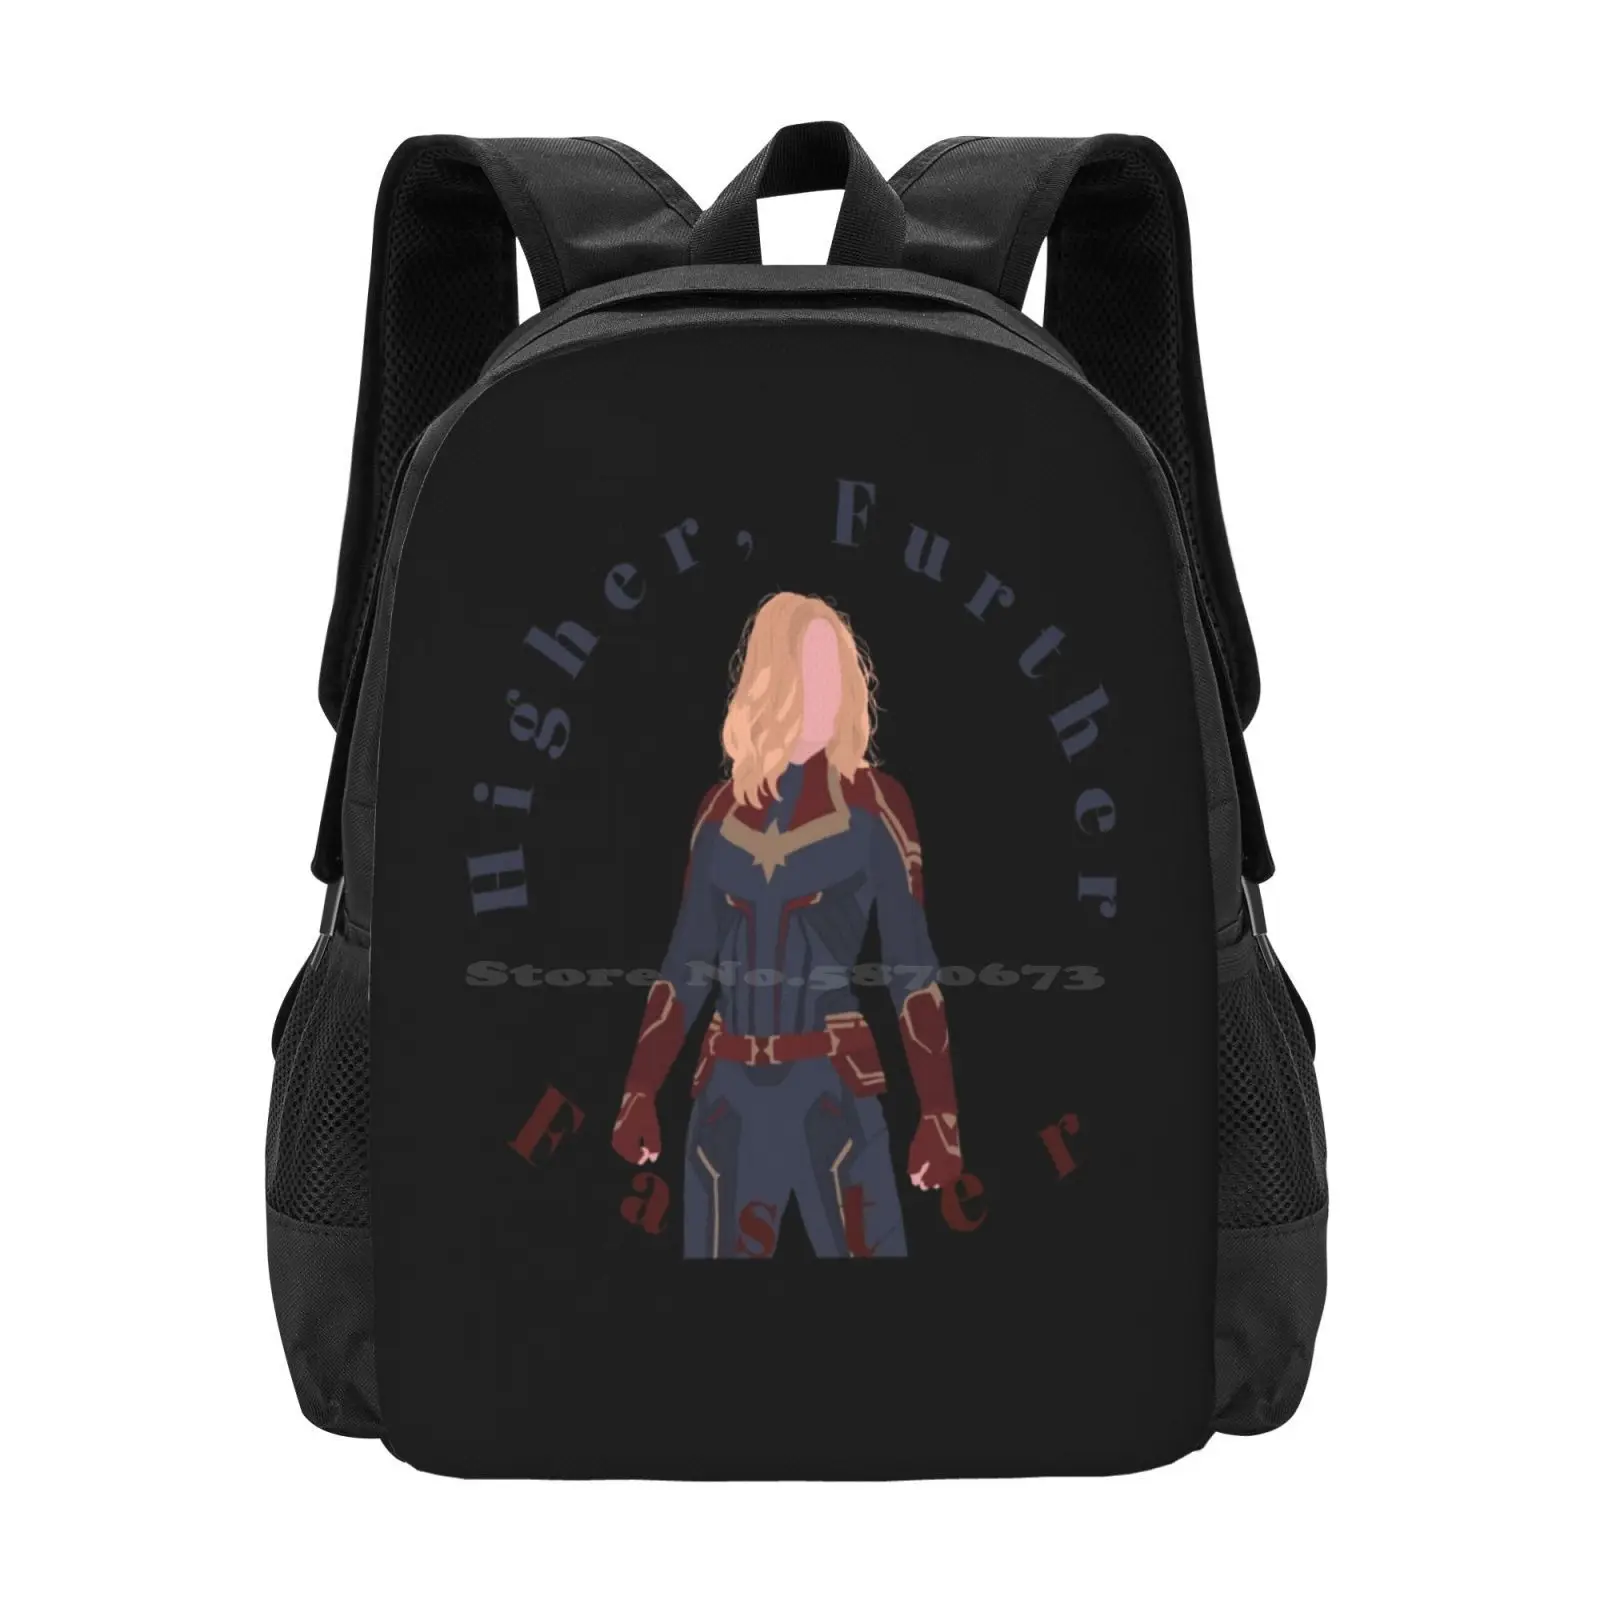 

Higher Further Faster New Arrivals Unisex Bags Student Bag Backpack Comics Captain Carol Danvers Natasha Romanoff Scarlet Witch